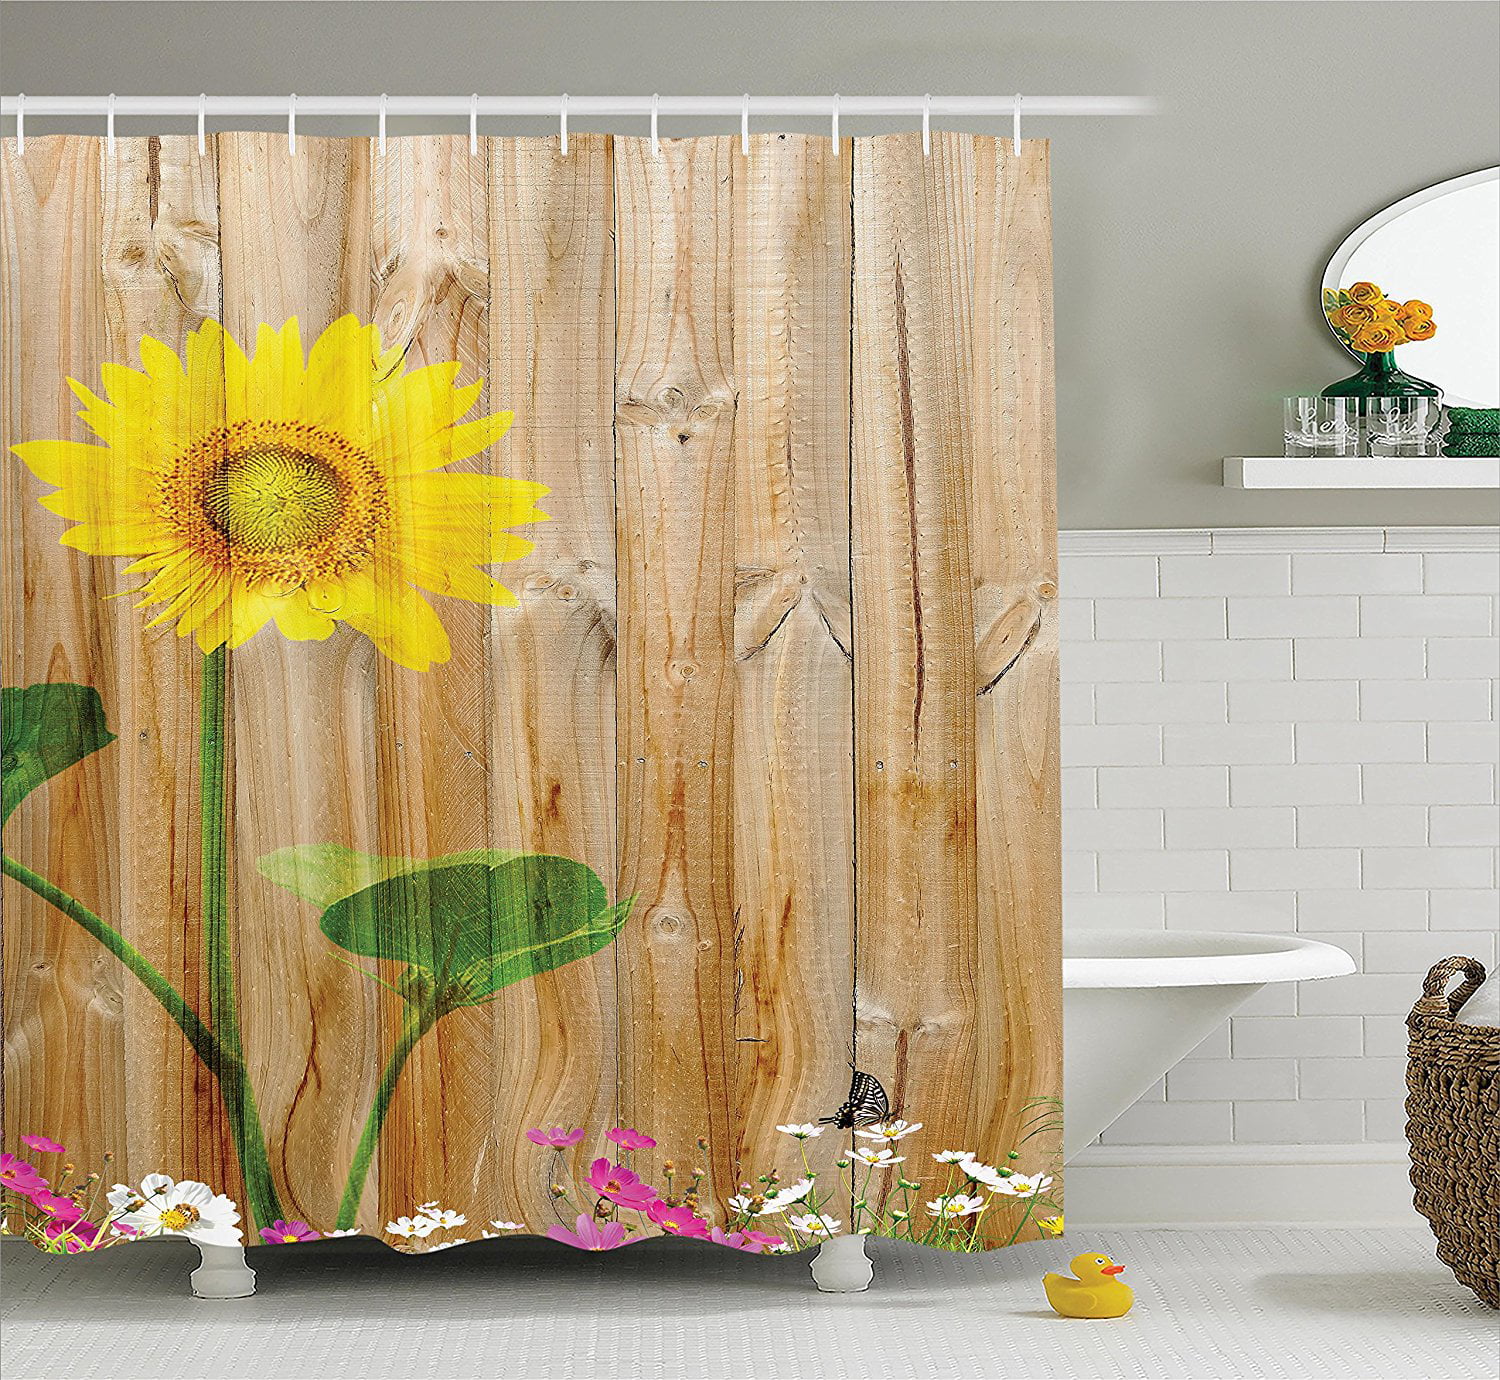 Small luggage tag Sunflower Decor Collection Sunflower Painting on Wooden Background Vertical Timber Countryside Fence Picture Print Quickly find the suitcase Yellow Green W2.7 x L4.6 